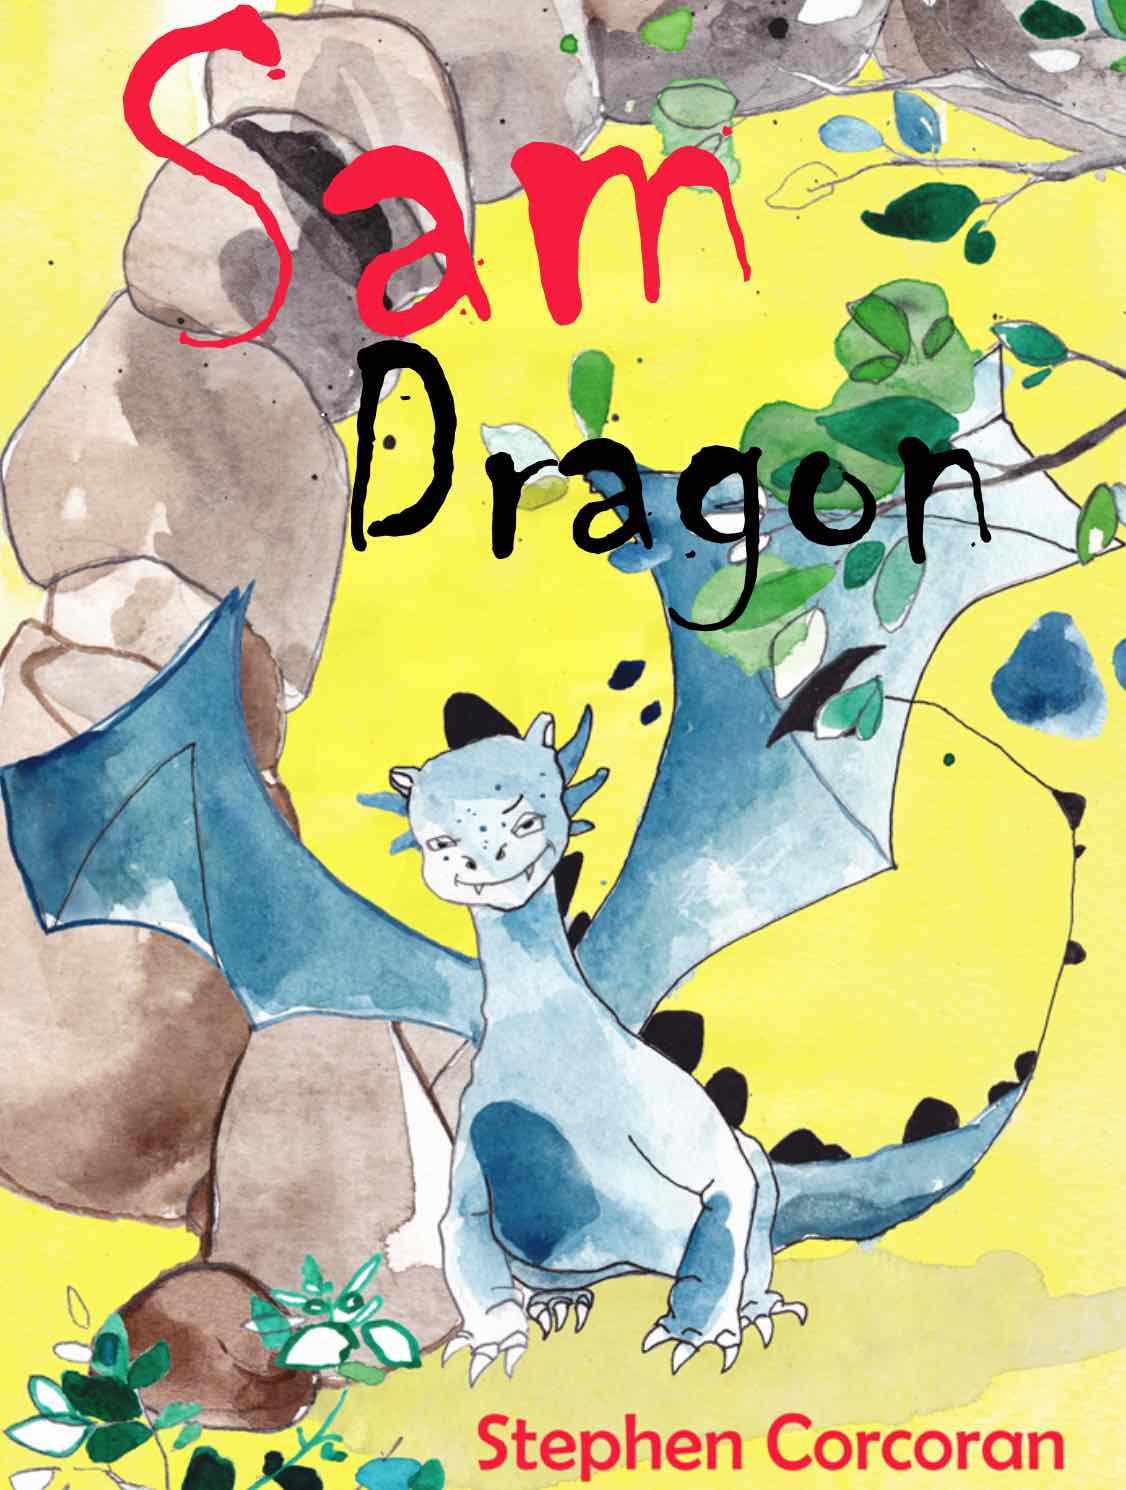 Sam Dragon - MG humour, a fairytale about being different - Free Kids Books